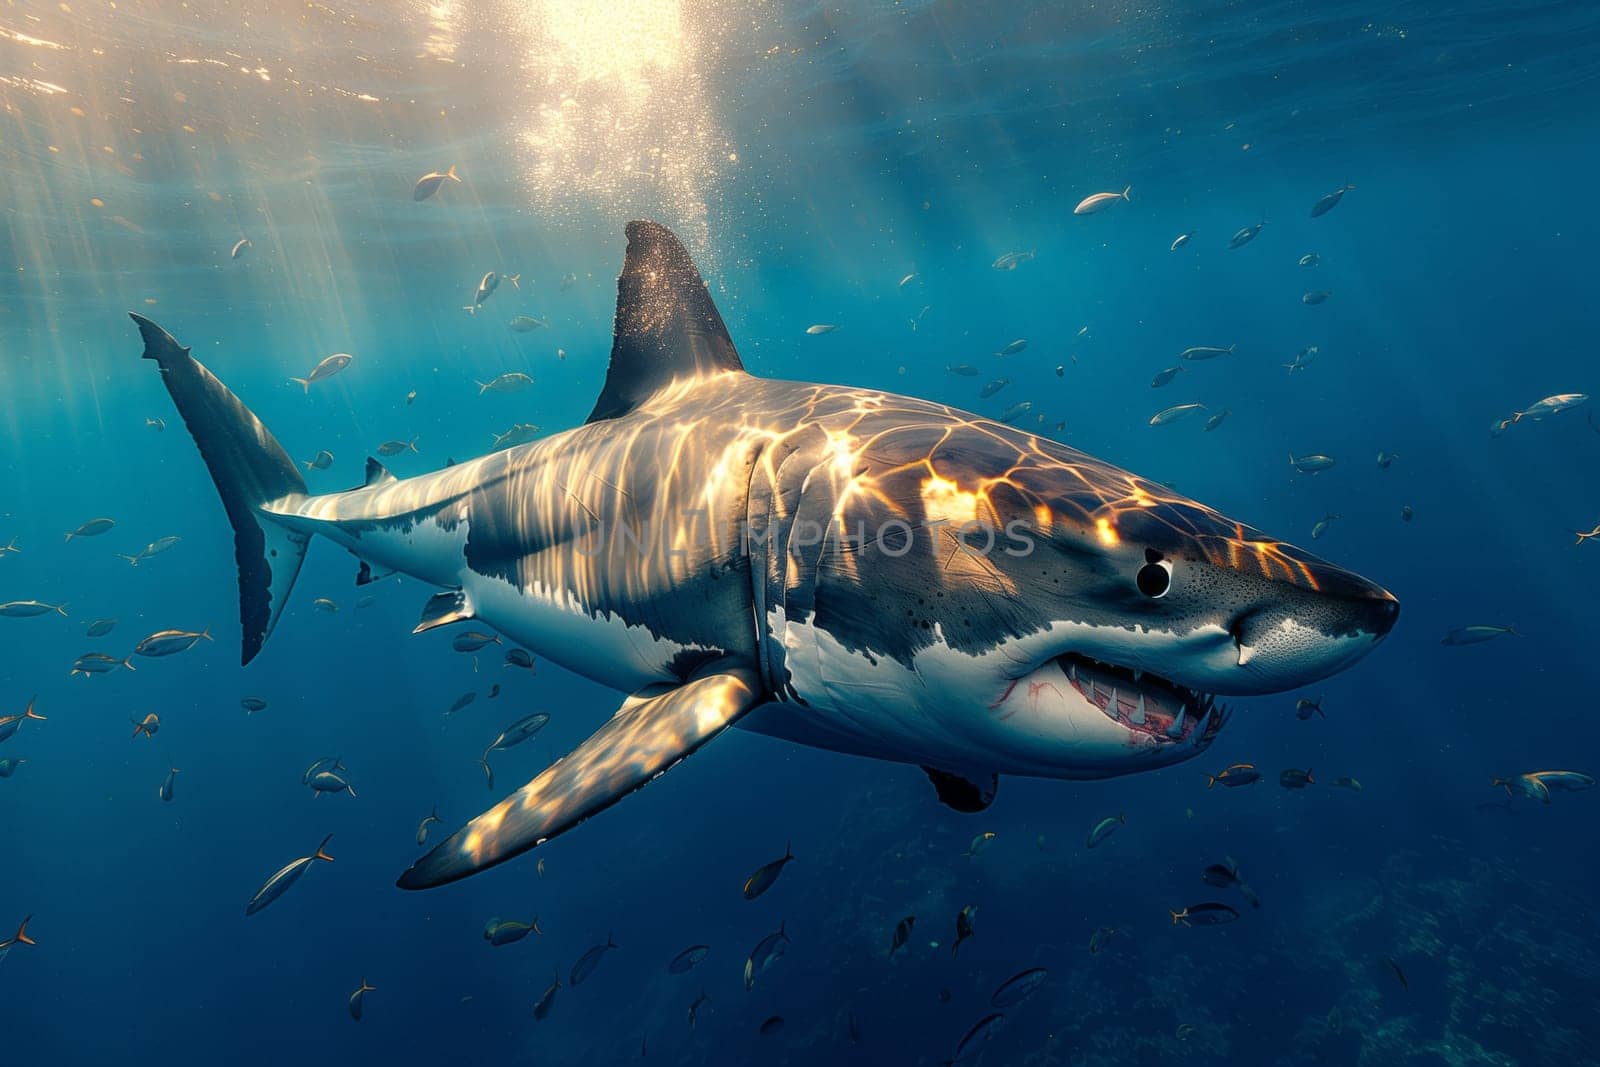 A formidable Lamnidae shark, known as the great white shark, gracefully swims in the underwater world, showcasing its powerful fin and impressive presence in the ocean